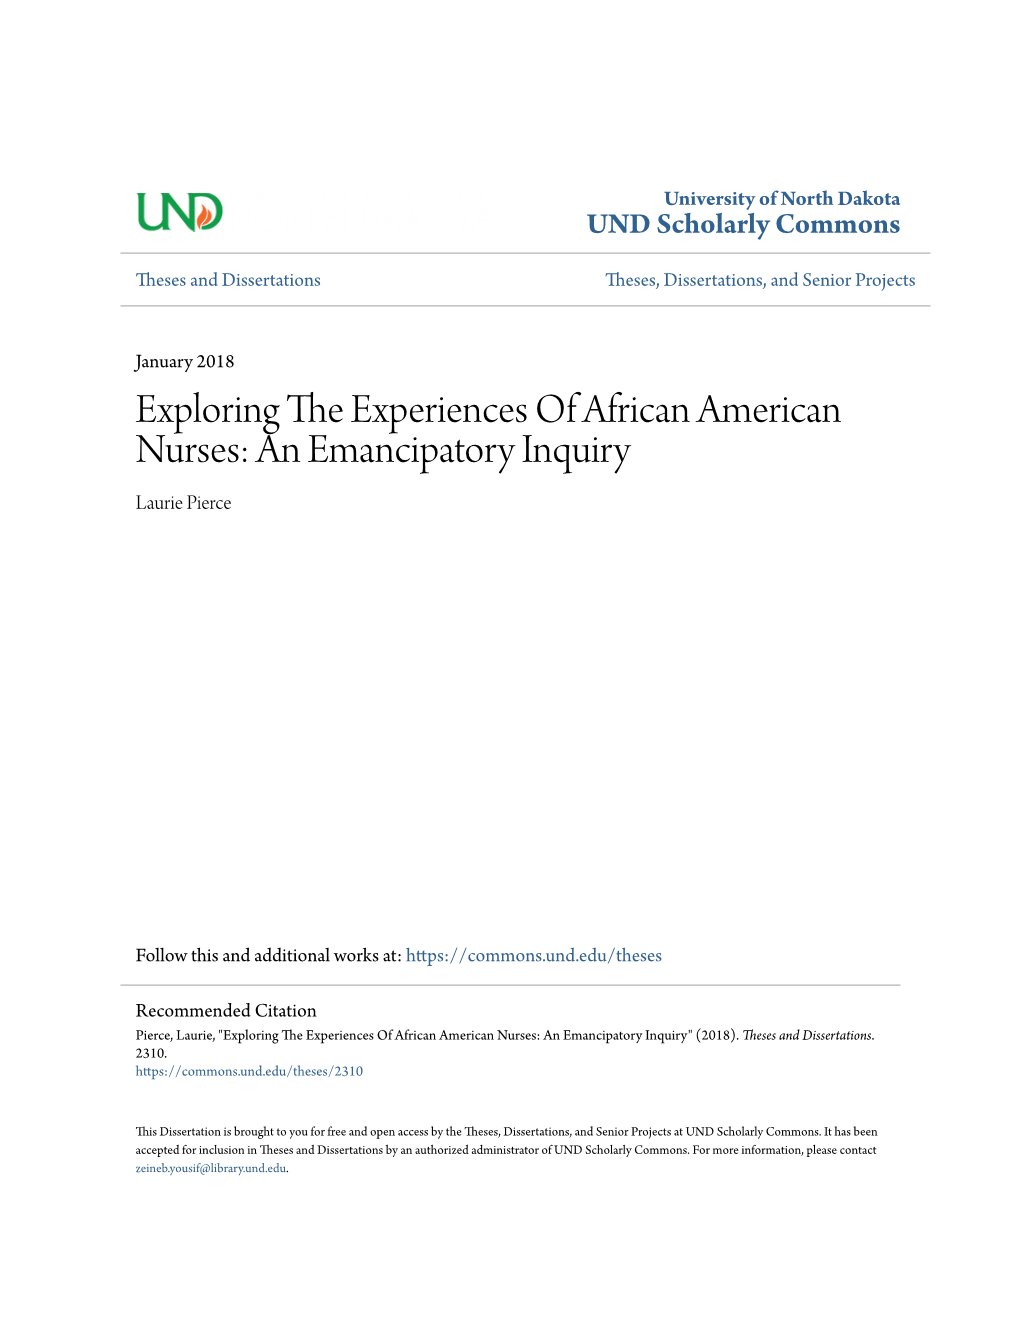 Exploring the Experiences of African American Nurses: an Emancipatory Inquiry Laurie Pierce